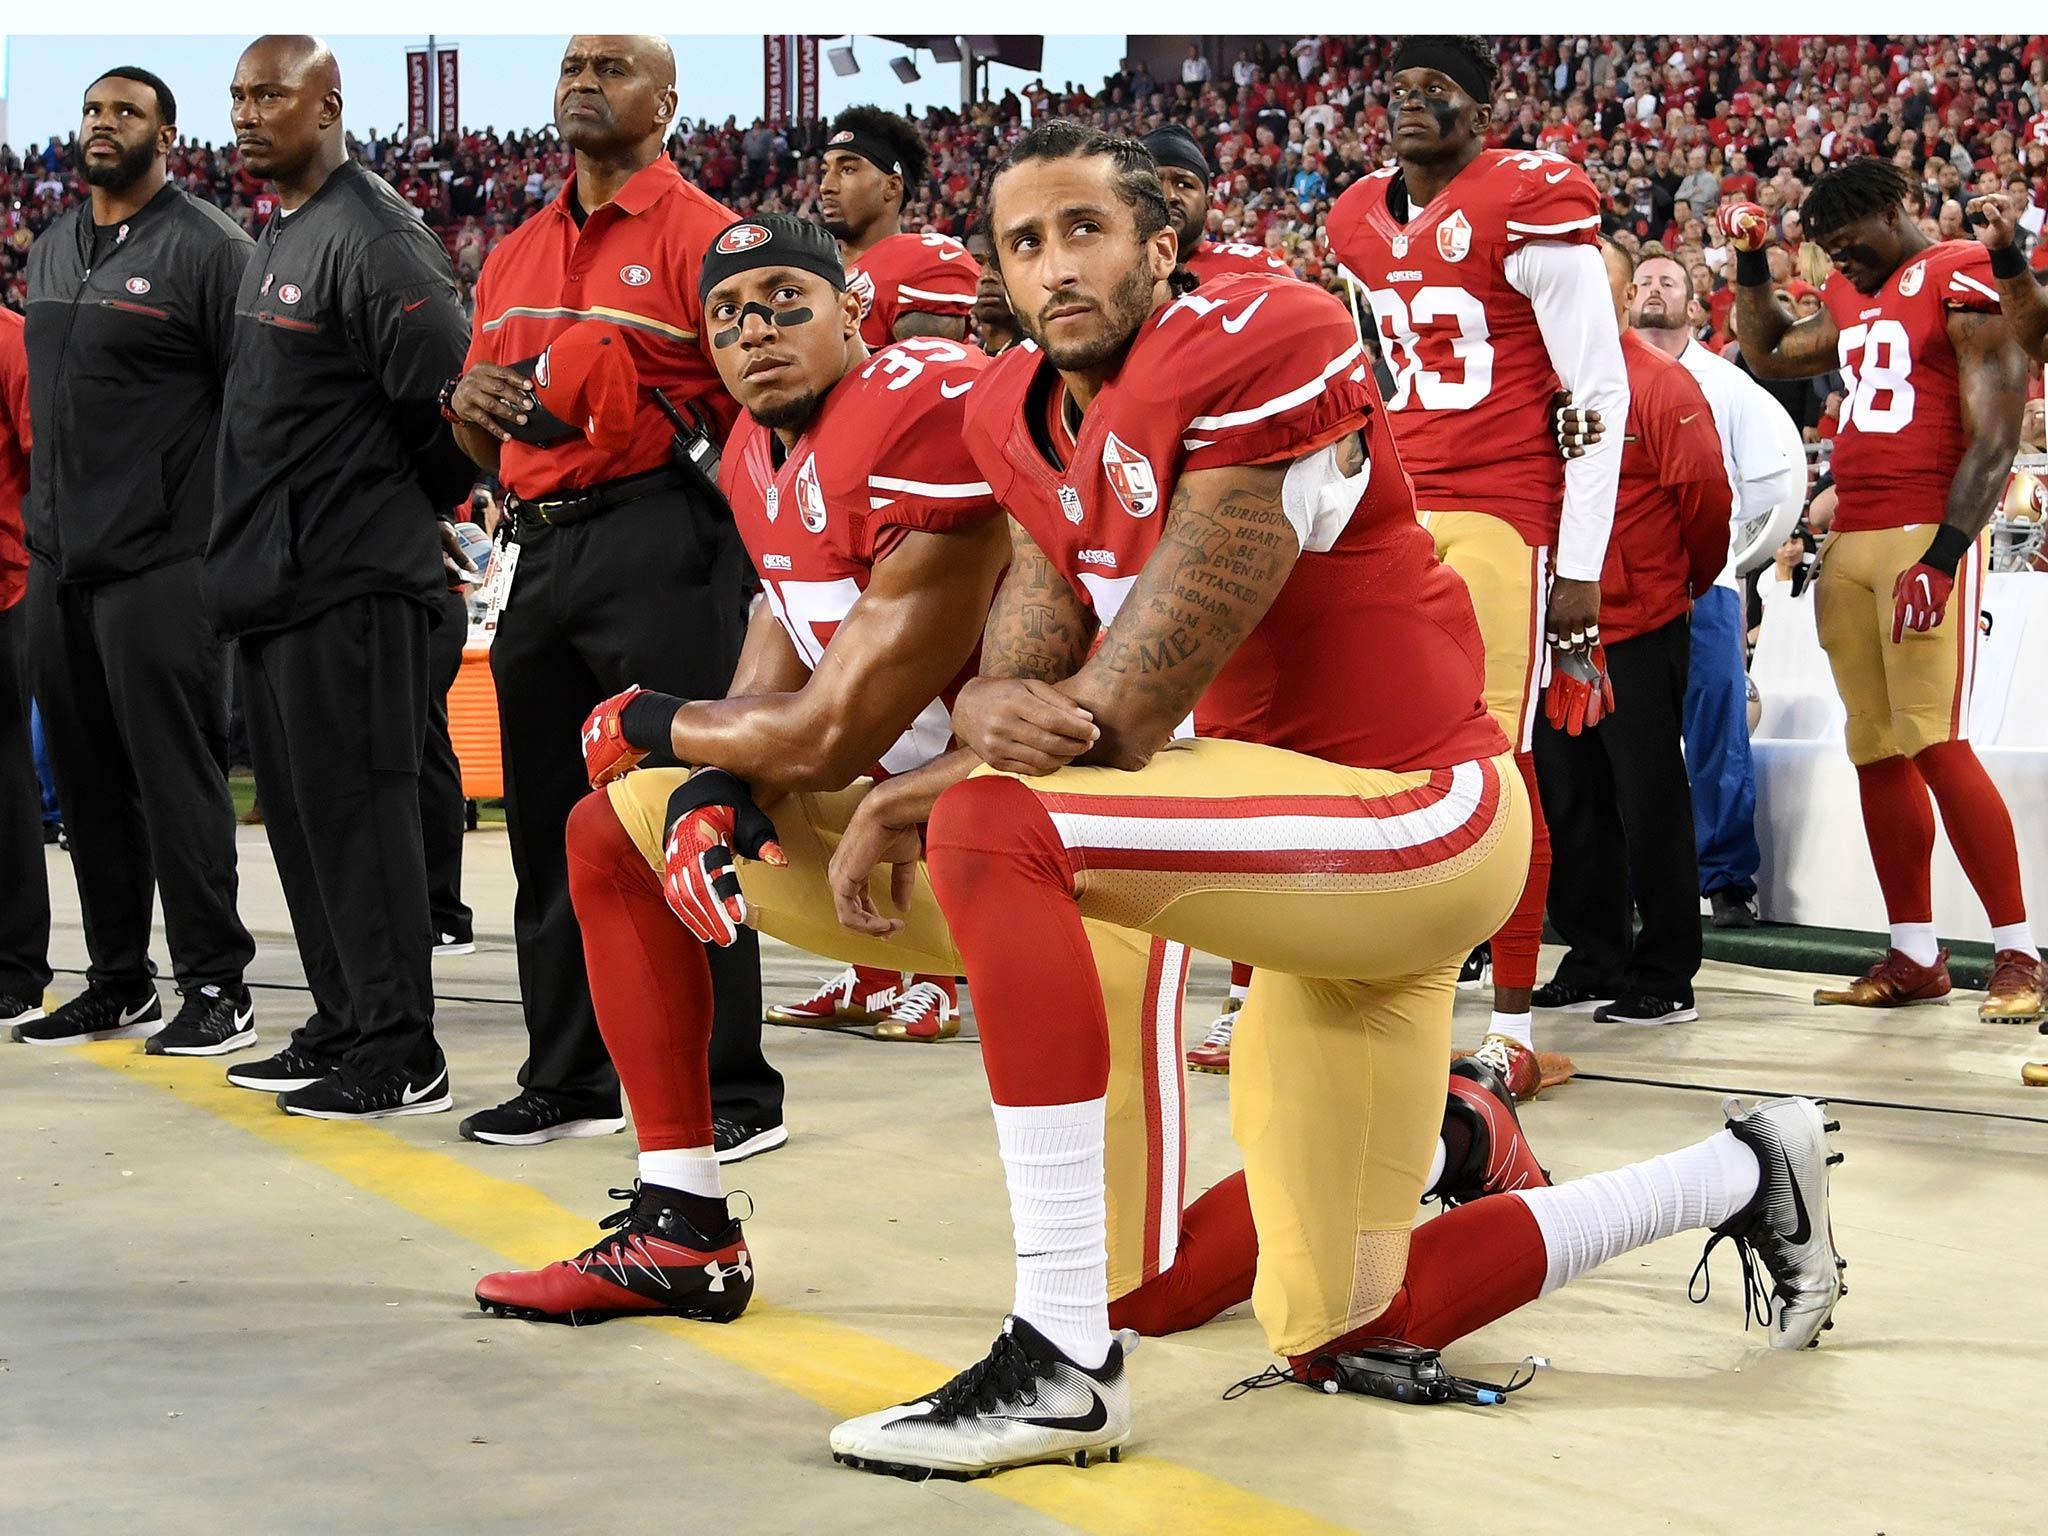 Kaepernick made waves in the sports world with his protest of police brutality and racism in America